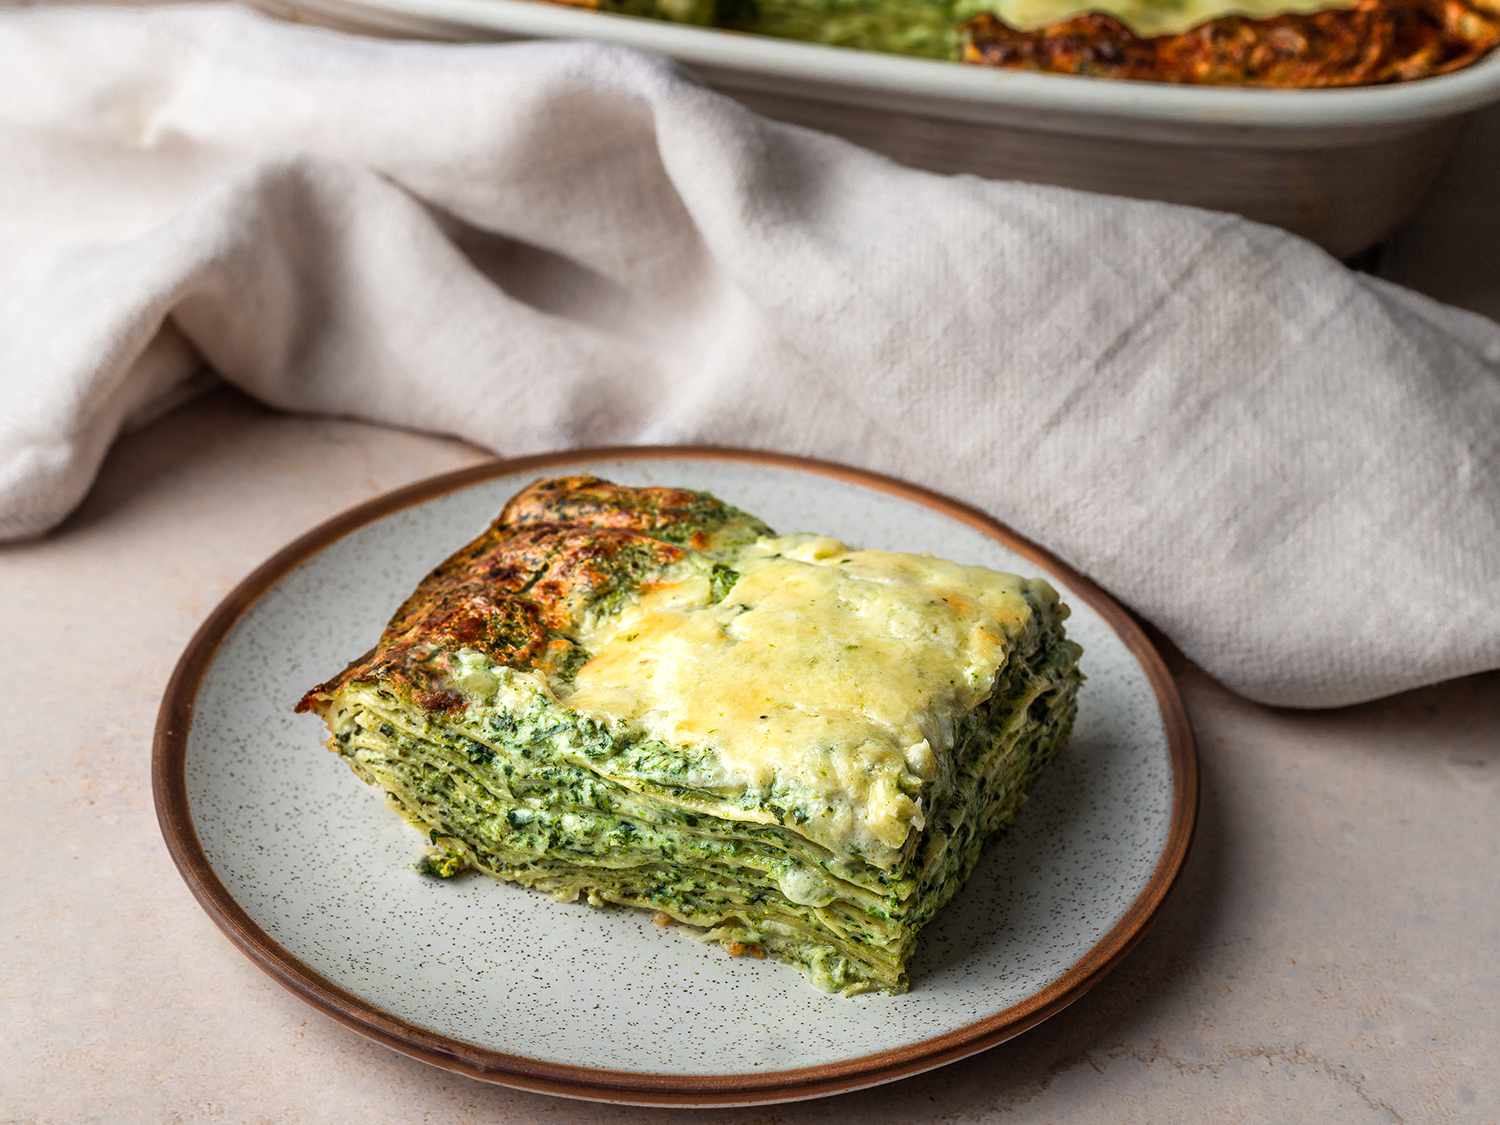 A slice of spinach lasagna on a ceramic plate, with a cloth and the remaining lasagna behind it.